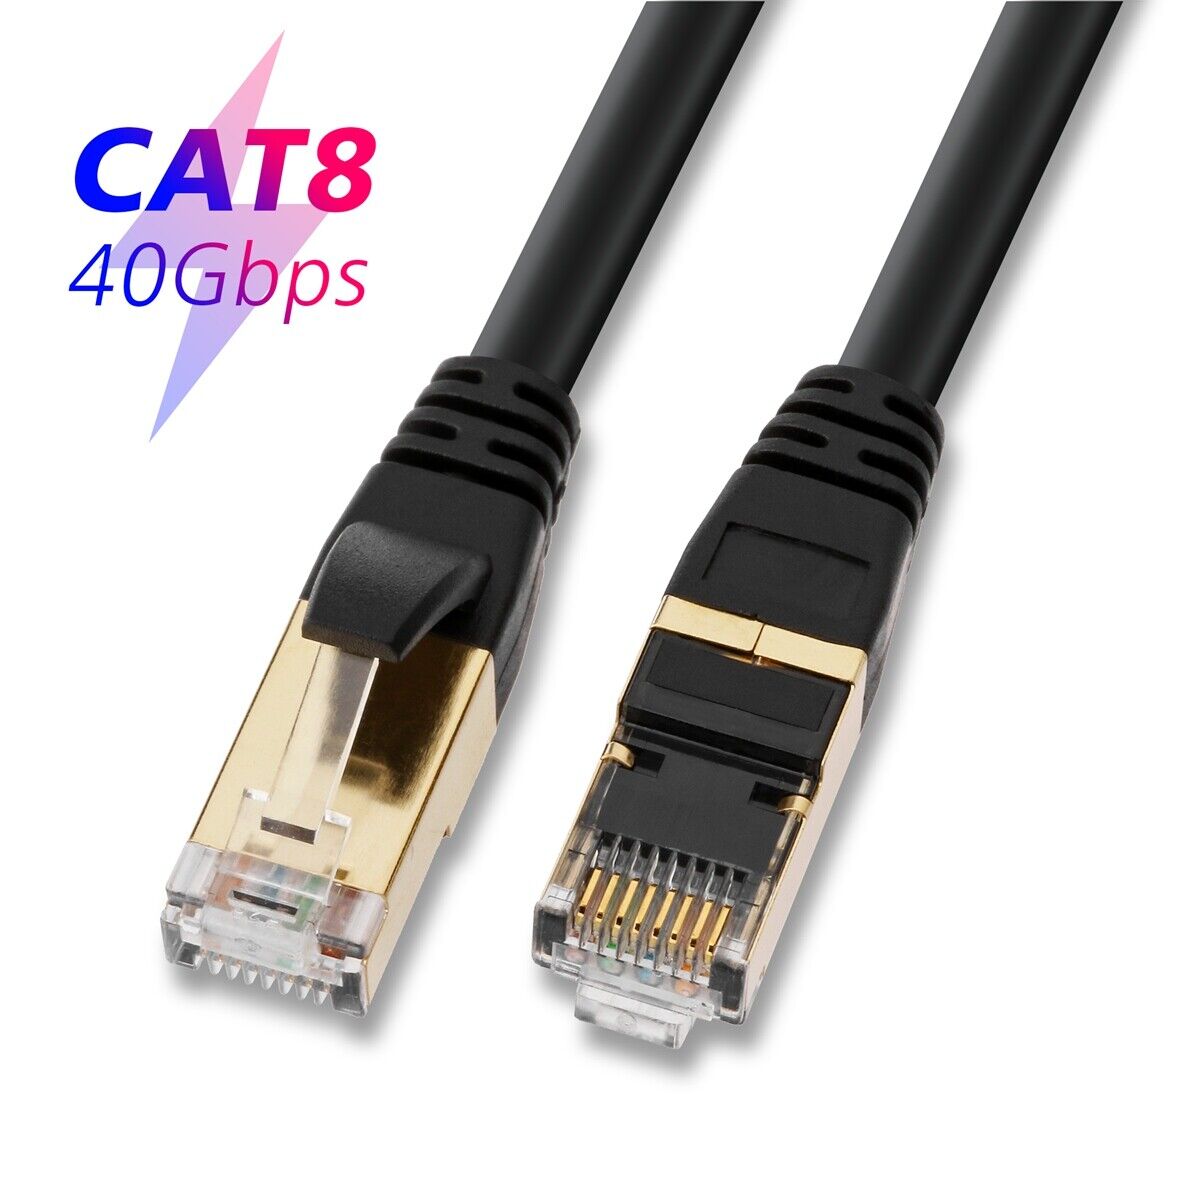 [Ultra Speed] Cat 8 Ethernet Cable RJ45 Cord Lot - 3 6 10 15 25 30 50 66ft